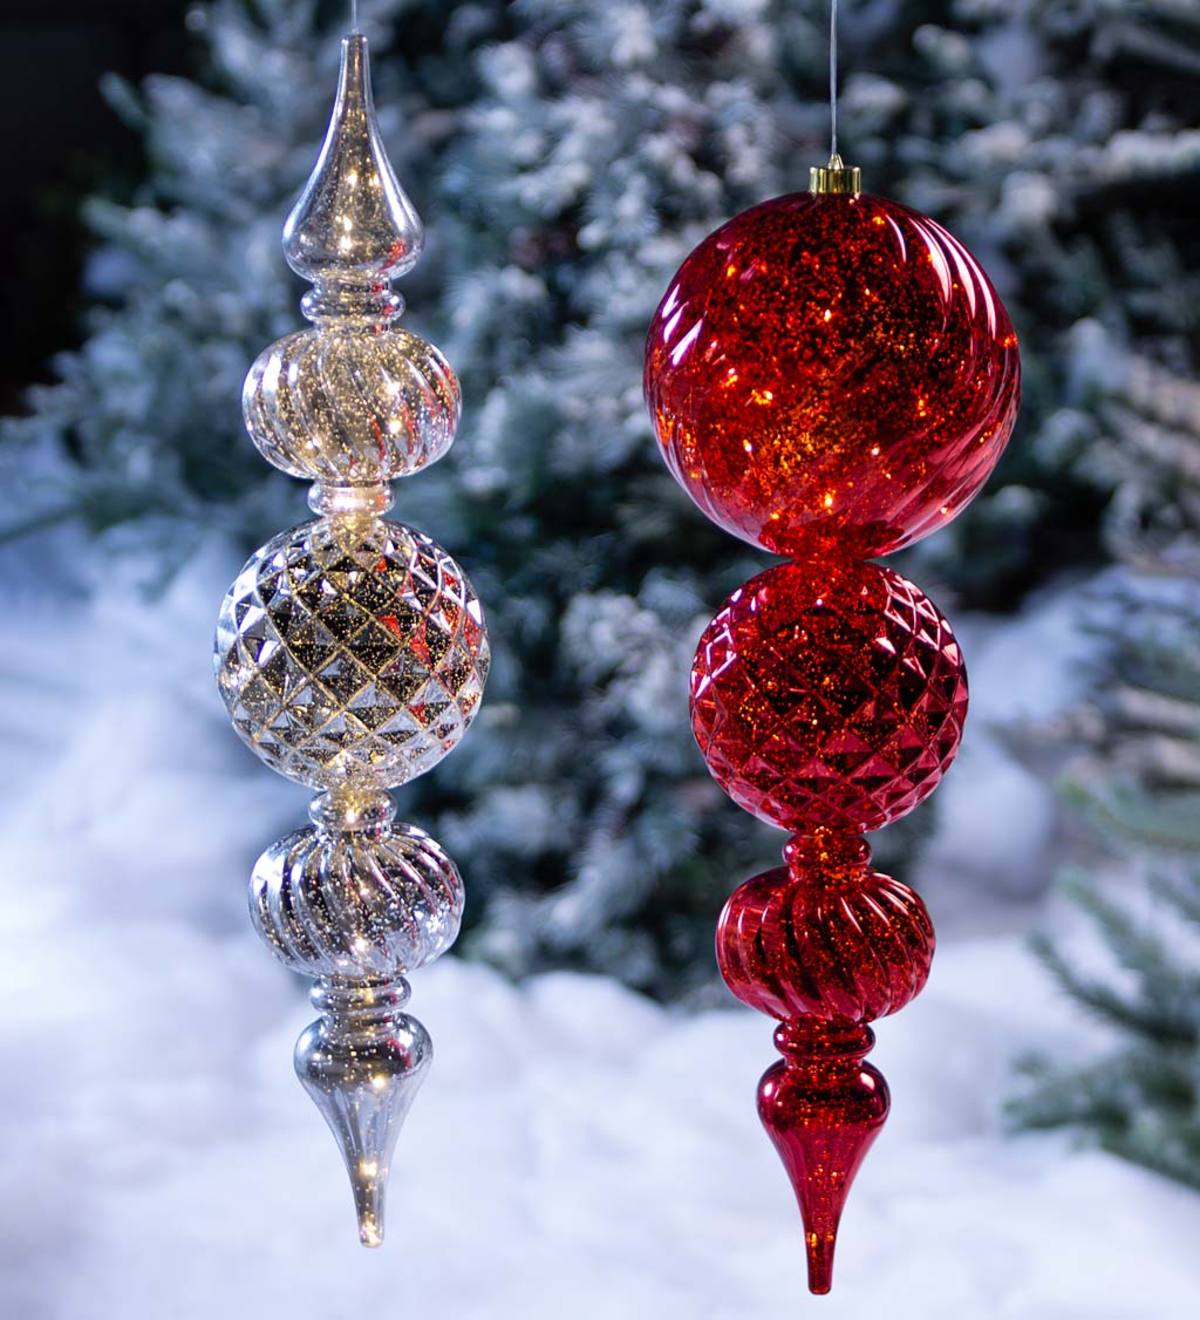 Indoor/Outdoor Shatterproof Holiday Lighted Large Finial Hanging Ornament